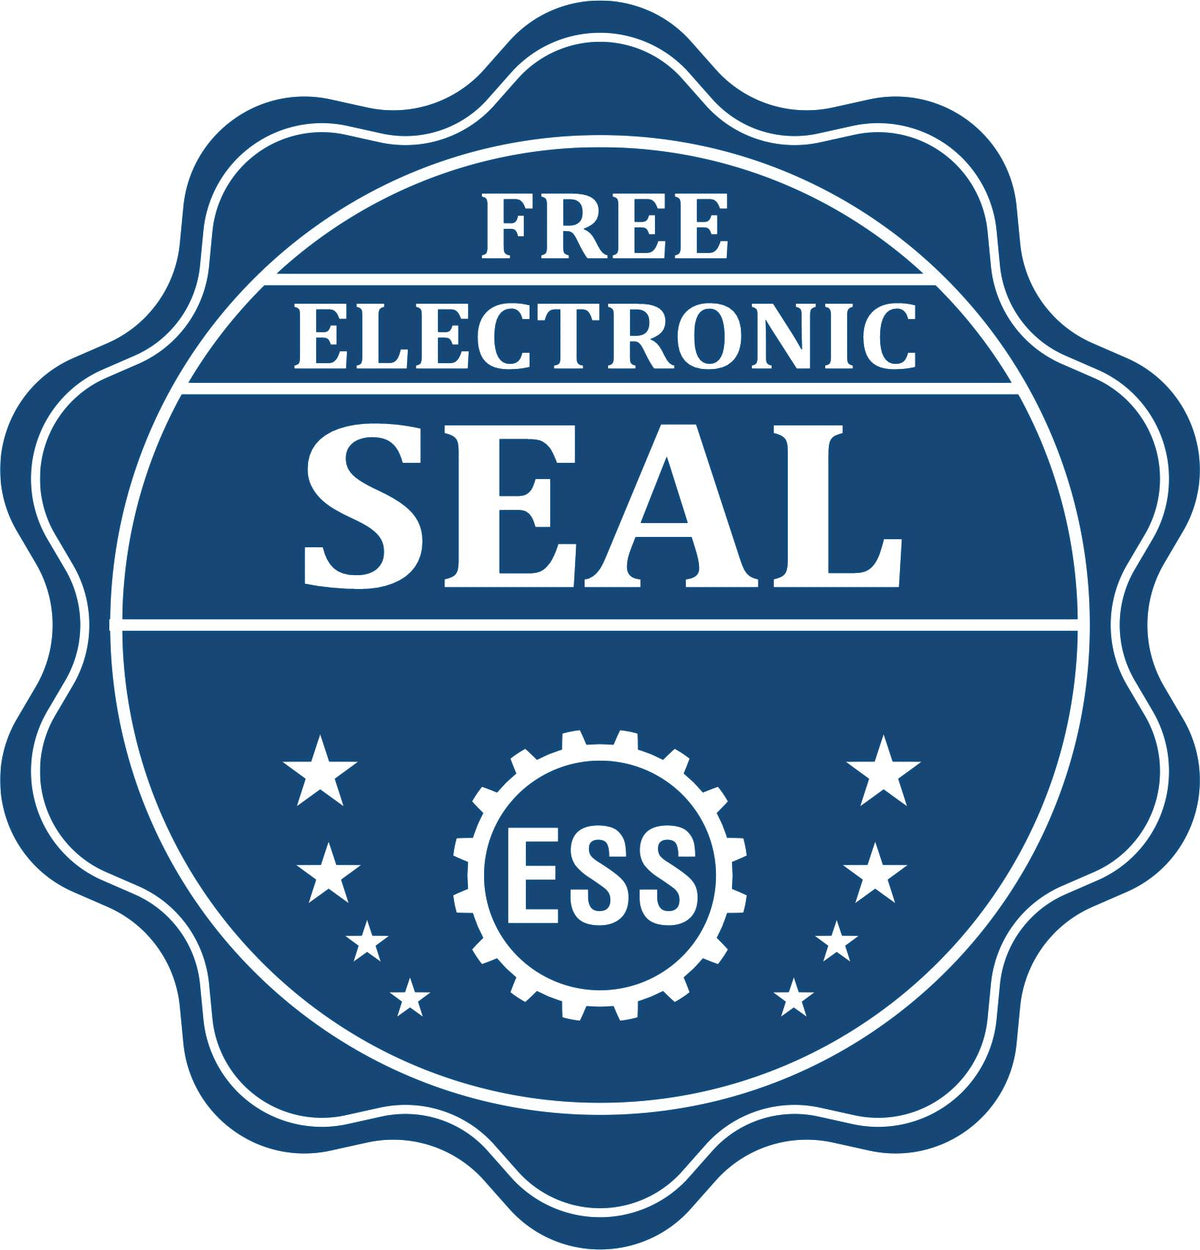 A badge showing a free electronic seal for the Gift Maine Architect Seal with stars and the ESS gear on the emblem.